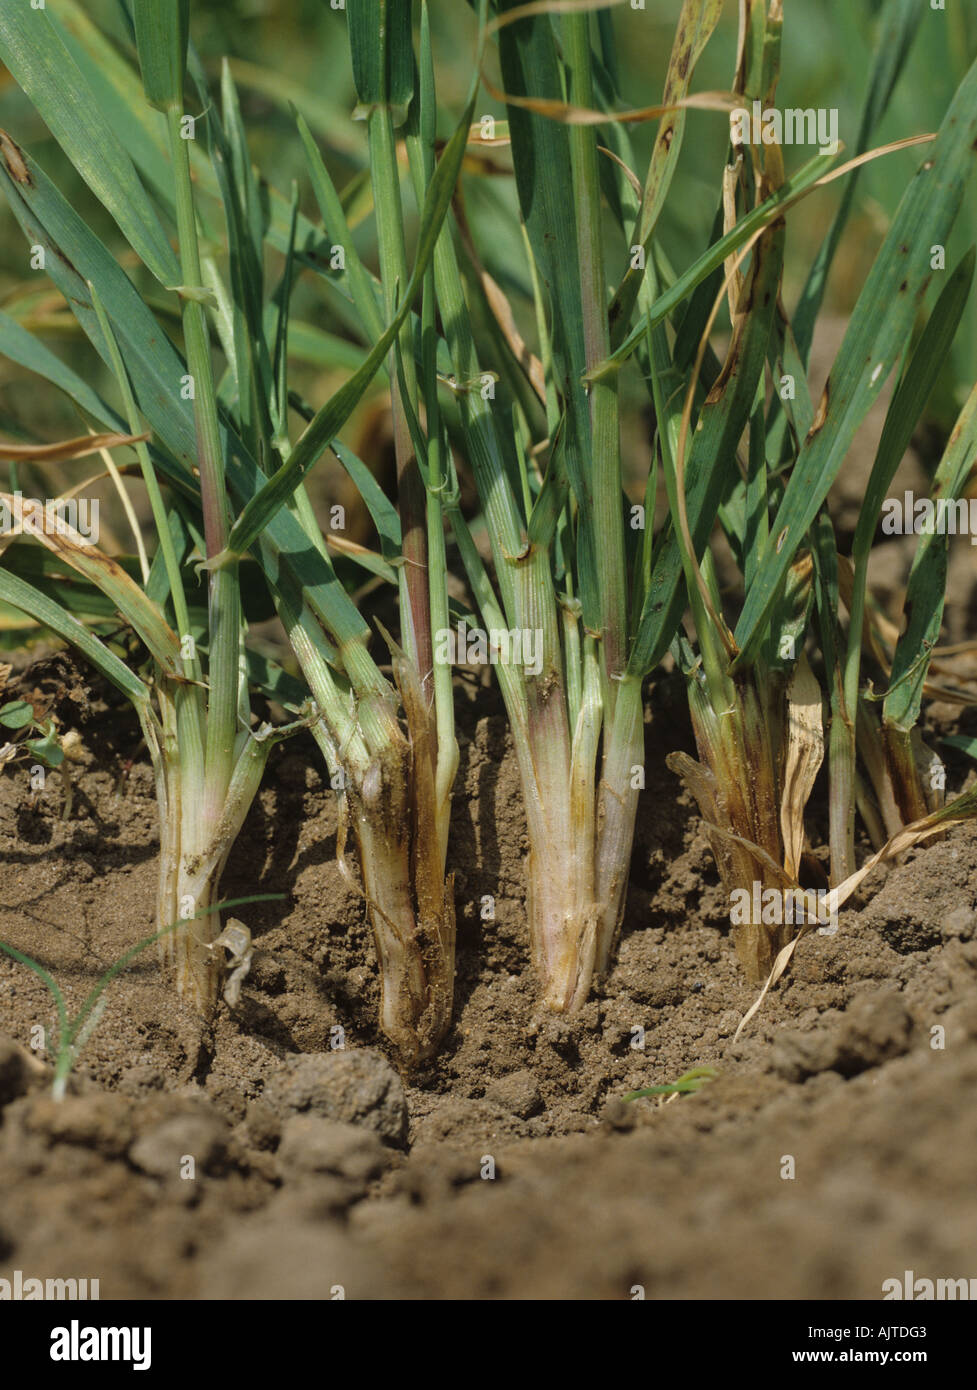 Common root rot Cochliobolus sativus browning at the bases of young barley plants Stock Photo